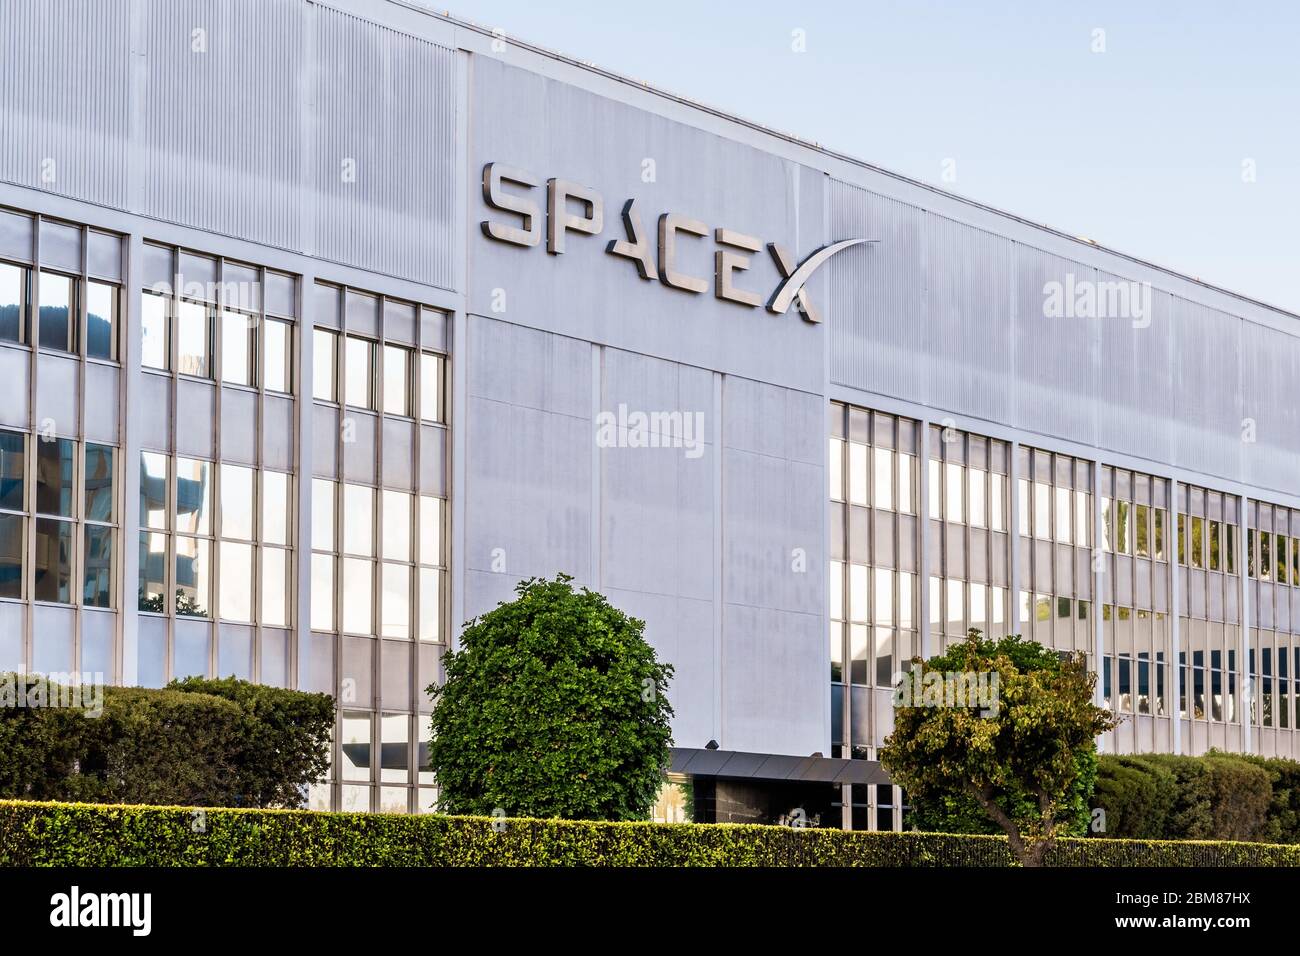 Dec 8, 2019 Hawthorne / Los Angeles / CA / USA - SpaceX (Space Exploration Technologies Corp.) headquarters; SpaceX is a private American aerospace ma Stock Photo